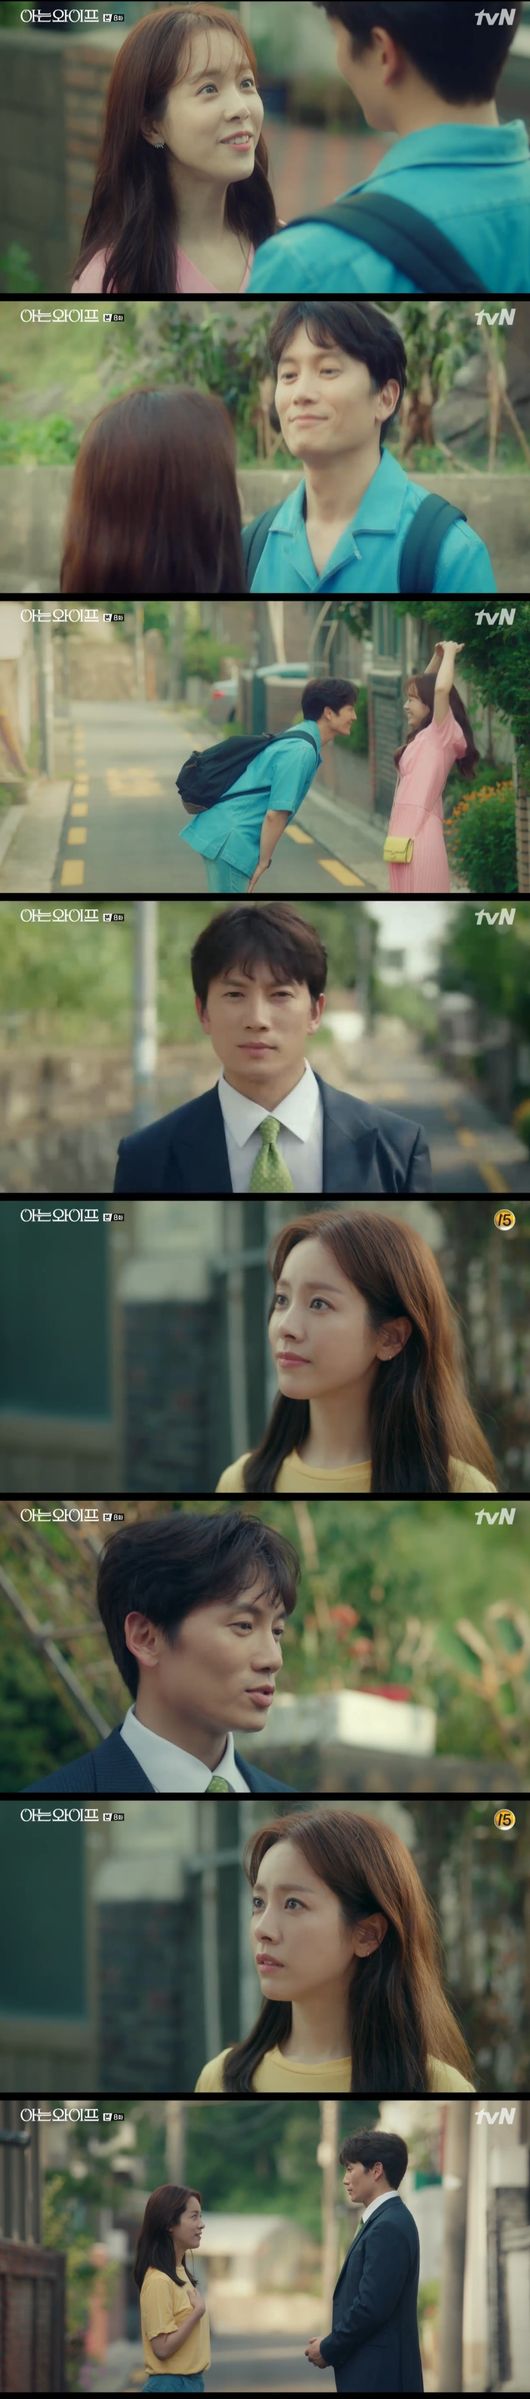 Kang Han-Na in Ai Wife brought tension to the drama, doubting the relationship between Han Ji-min and Ji Sung.Hyewon (Kang Han-Na), who became suspicious between Woojin (Han Ji-min) and Ji Sung-bun, was portrayed in the TVN drama Ai Wife (directed by Lee Sang-yeop, played by Yang Hee-seung) broadcast on the 23rd.He finally found the coin in 2006 and headed for Toll gate, which he thought was where he changed his fate.Then he drove along the roads, but there was no Toll gate in question. Juhyuk headed for the subway, where he had witnessed the questionable man.As expected, I found the questionable man in the bathroom in the station. The homeless man lay on the box.Joo Hyuk kneeled and asked how to return to the past, but failed.The next day, Ju-hyeok turned the cleaner to catch up again. He said he would set it up until morning for Hye-won.When Hye-won wondered, Joo Hyuk vowed to start a new start, saying, Since the new Haru has started, I will live hard and responsibly.Hye-won found Hyun-soo at the gym. Suddenly, he felt the empty seat of the invisible Su-su. Hye-won sighed, saying, Youre not coming because of me.But I kept looking around to see if Suspension was coming.At World Bank, the deputy director appeared and was surprised. They were not the person they had expected. At this time, the vice president found Woojin.When there was no Woojin because of the monthly difference, he said, Please tell me that it was kind and impressive with sincerity.After the end, he wanted to see Woojins vacancy. He said, I just met him. After the end, he called, We will listen to Woojin.But when he didnt answer the phone, he was worried. He was worried about what was going on.Woojin overslept on his monthly rent, but as soon as he got up he noticed that the town had disappeared again, and he continued to search the neighborhood, but he was not seen.He found the trail and hurried around.Alcoholic drink was caught in World Bank; the latter objected, saying, There is no hero, what is Alcoholic drink?Joo Hyuk also said that Kim Il-bong was strange because of Woojin, but eventually Alcoholic drink without Woojin continued.The latter continued to wait for Woojins contact, but when he was not in contact in his absence, he worried about it and told Juhyuk.Then, when I said that I was saddened by the two of them, Juhyuk was concerned.In the meantime, I was sorry to look back on myself who did not get the due date because of Alcoholic drink and work every year.Joo Hyuk unwittingly headed to Woojins house, putting the gift in front of the gate, saying, My father-in-law, it was too late.Woojin and Zhang Mo please calm me and go. He left a greeting at the door and then secretly pressed the doorbell and ran away.At this time, I found Woojin coming home alone. Woojin went to her mother all day, but she cried that there was no place.Joo-hyuk called the police with Woojin, comforting Woojin that he would have found it, and then worried about Woojin, who would have eaten nothing.At this time, Hye-won called me. Hye-won said why he did not come home. He lied that his staff was injured and went to the province.Then I bought something to eat for the tired Woojin, and I wondered how to find Zhang Mo. At this time, I came to the common sense that I was looking for a lost puppy on SNS.I took a picture of Zhang Mo on Woojins cell phone in my sleep.Ju-hyuk hastily said he posted a photo on social media to find Zhang Mo.Woojin said, I do not think I can find my mother, I have not found it for so long even if I have found it for a few hours. What if I can not find it?Well find it, Ju-hyuk reassured.Then, I found a picture of , who is serving in a free lunch center through social media, serving homeless people at Free Food Stations.Woojin embraced as soon as he saw it, and tears, Juhyuk also said, I do not know how worried I was about Zhang Mo.Woojin thanked Joo Hyuk and decided to take him to the front. Woojin thanked him, saying, I was fully dependent on someone to be next to me.The two walked the streets together, and Joo Hyuk recalled his old memories on the street where he walked with Woojin.When he returned home, he went to the bathroom to take a shower, and Hye-won received the call number Woojin on his phone.Beyond the receiver, Woojin said, Why did you just go? And Hyewon said, Who are you?Its our car phone number, and Hyewon said, Why do you call my husband a car?In the black box, I heard the conversation between Joo Hyuk and Woojin, and Hyewon, who noticed Joo Hyuks lie, was angry, saying, Tell me, what is this?In the trailer, Hyewon was drawn to the suspicion of the two people, and the Lovers Vanished was predicted.Knowing Wipe broadcast screen capture